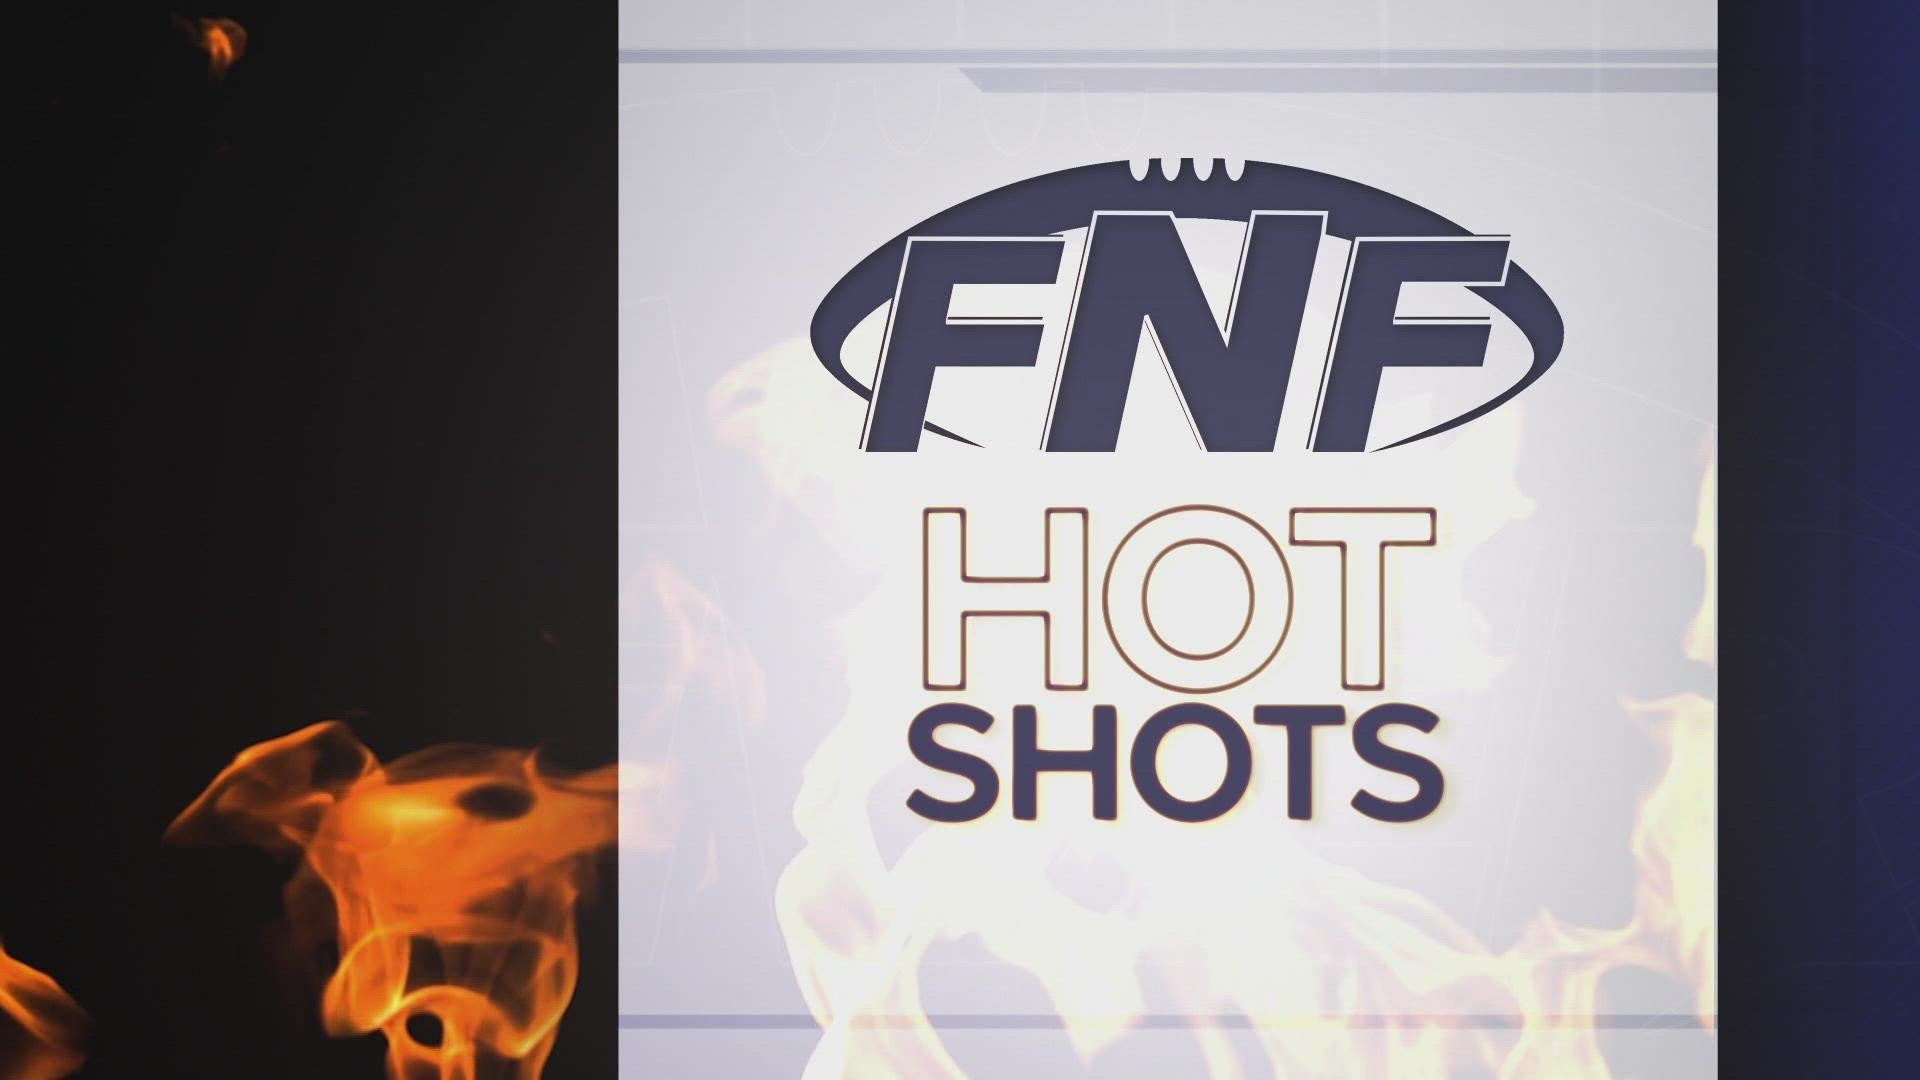 3 more awesome plays were nominated to become the FNF Hot Shots Play of the Week for Week 5! Watch them here and then vote for your favorite at 12News.com/Fever!